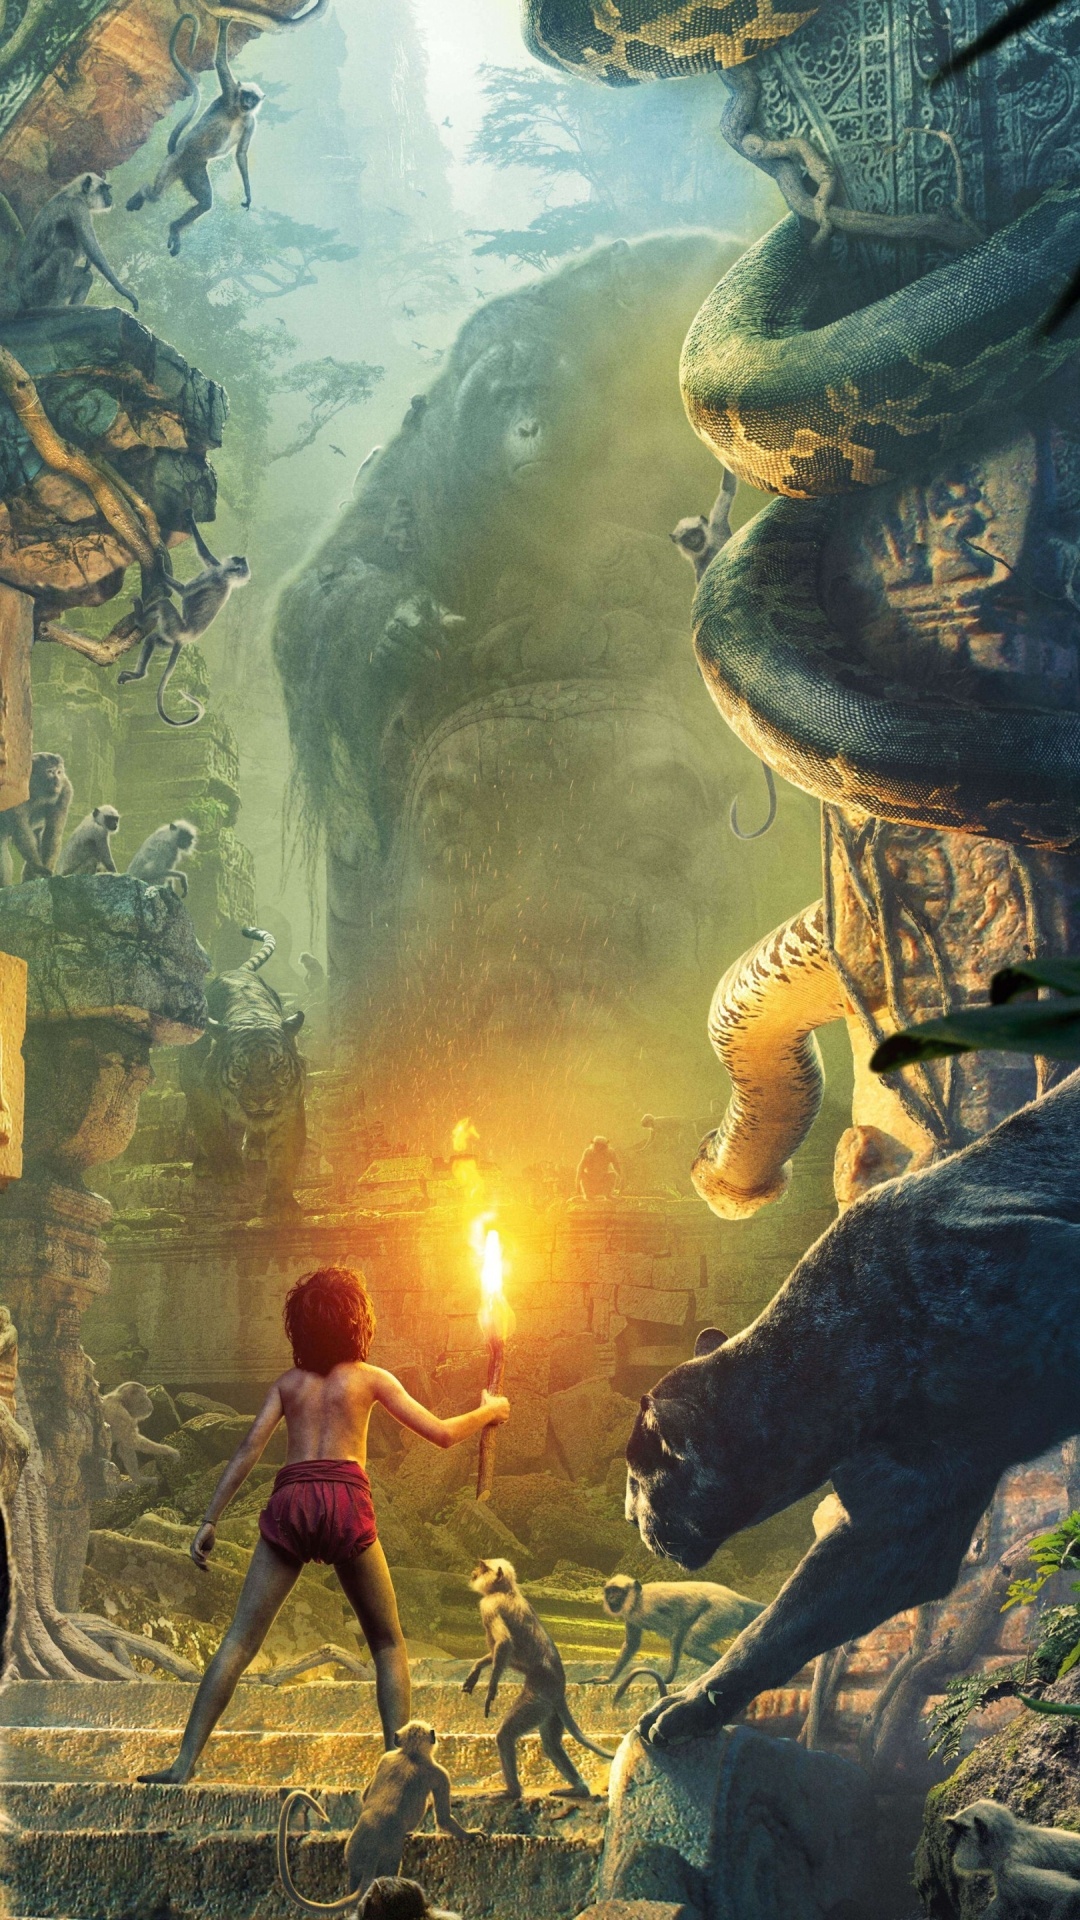 The Jungle Book (Movie), 2016 movie experience, Journey in the wild, Heartwarming tale, 1080x1920 Full HD Phone